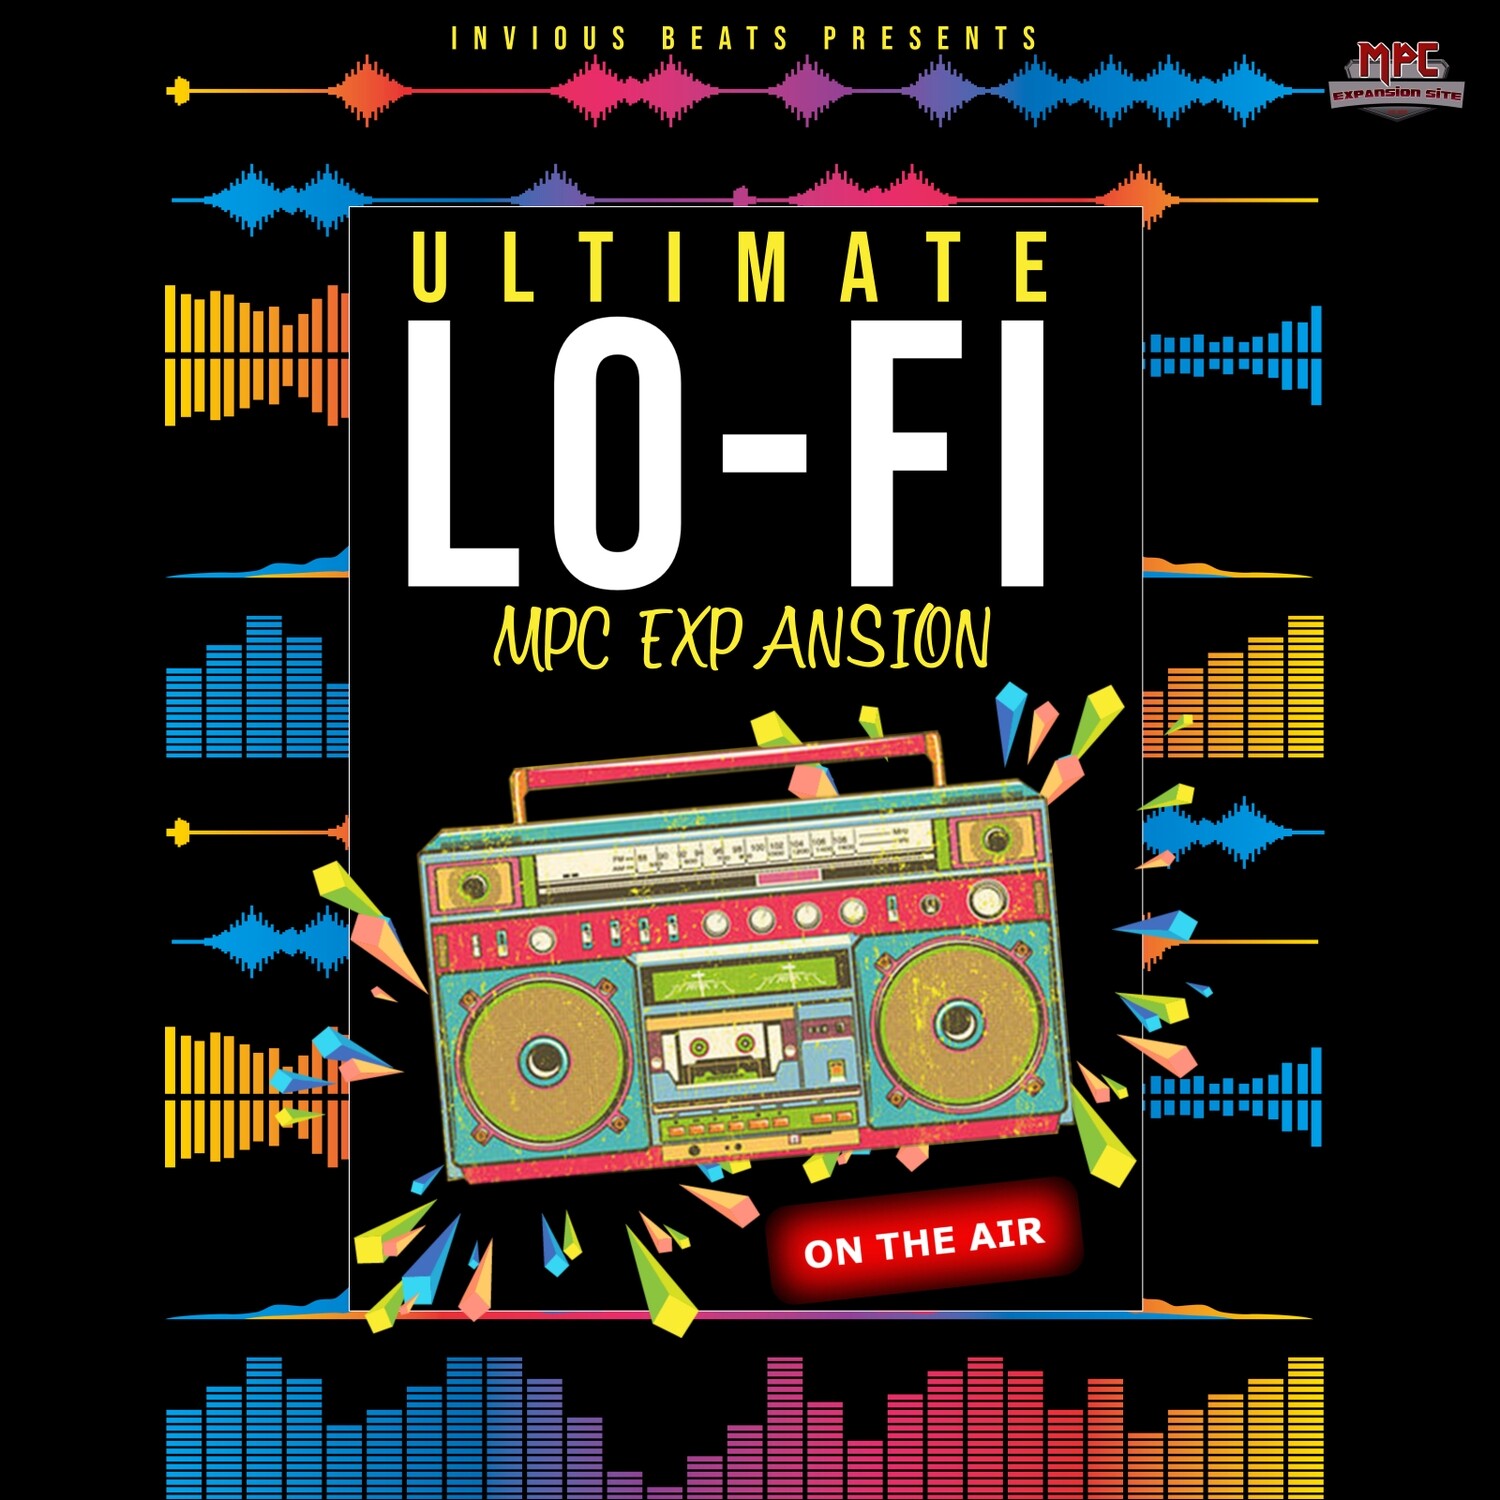 MPC EXPANSION 'ULTIMATE LO-FI' by INVIOUS